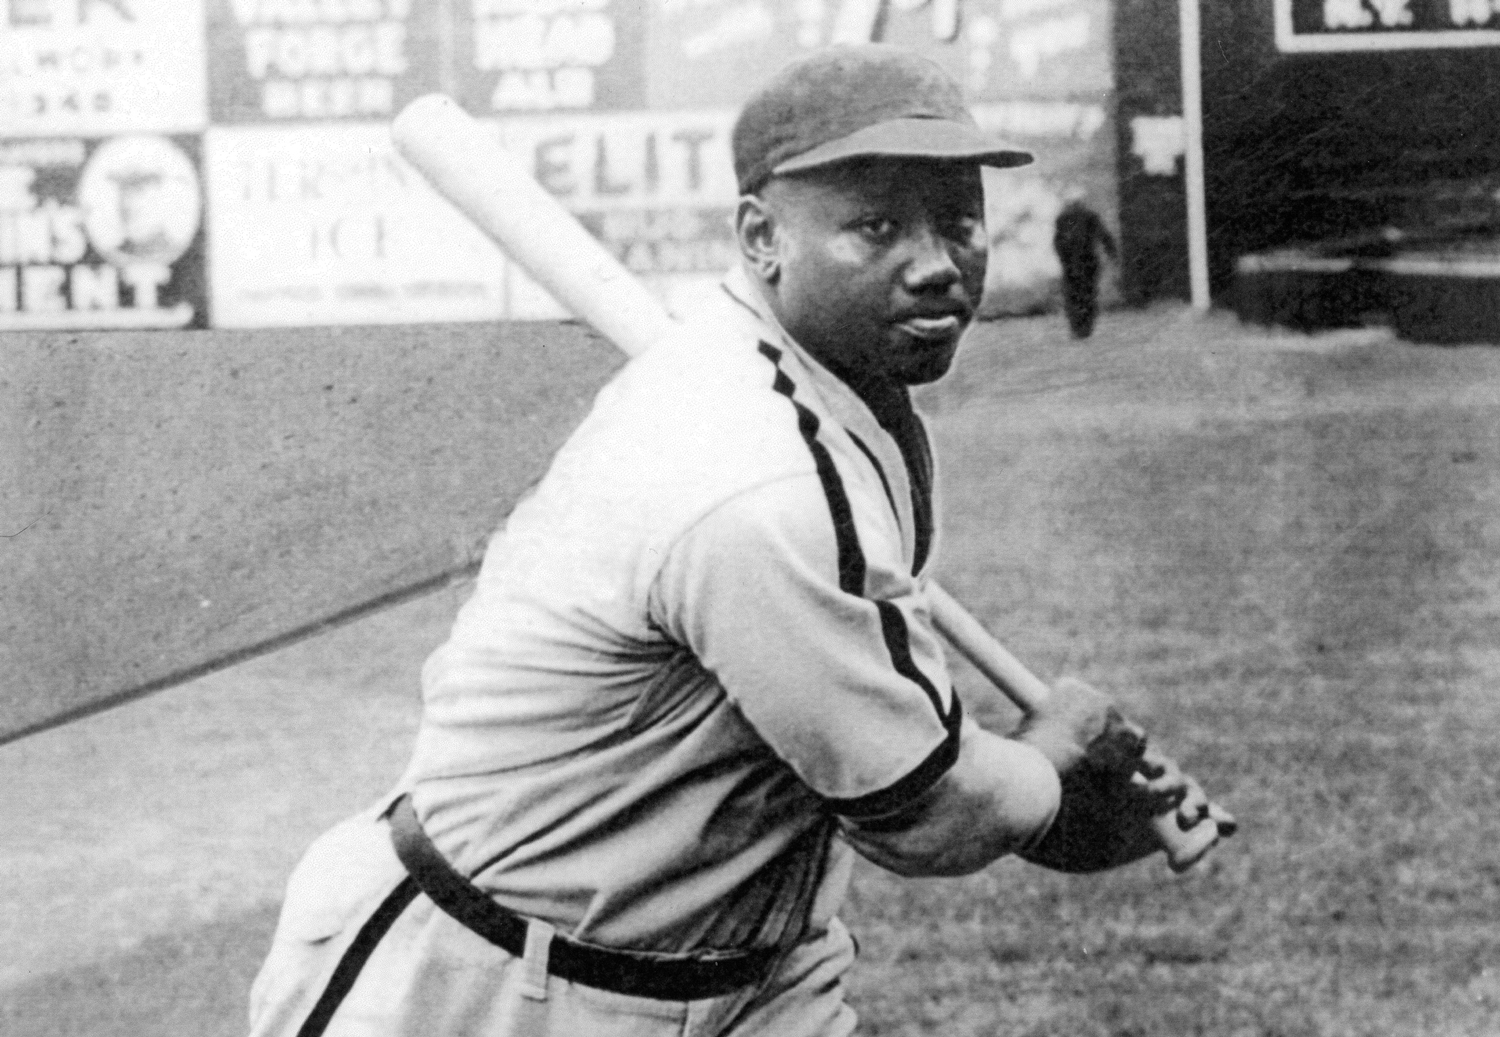 Josh Gibson stands on a baseball field, poised to swing a bat.